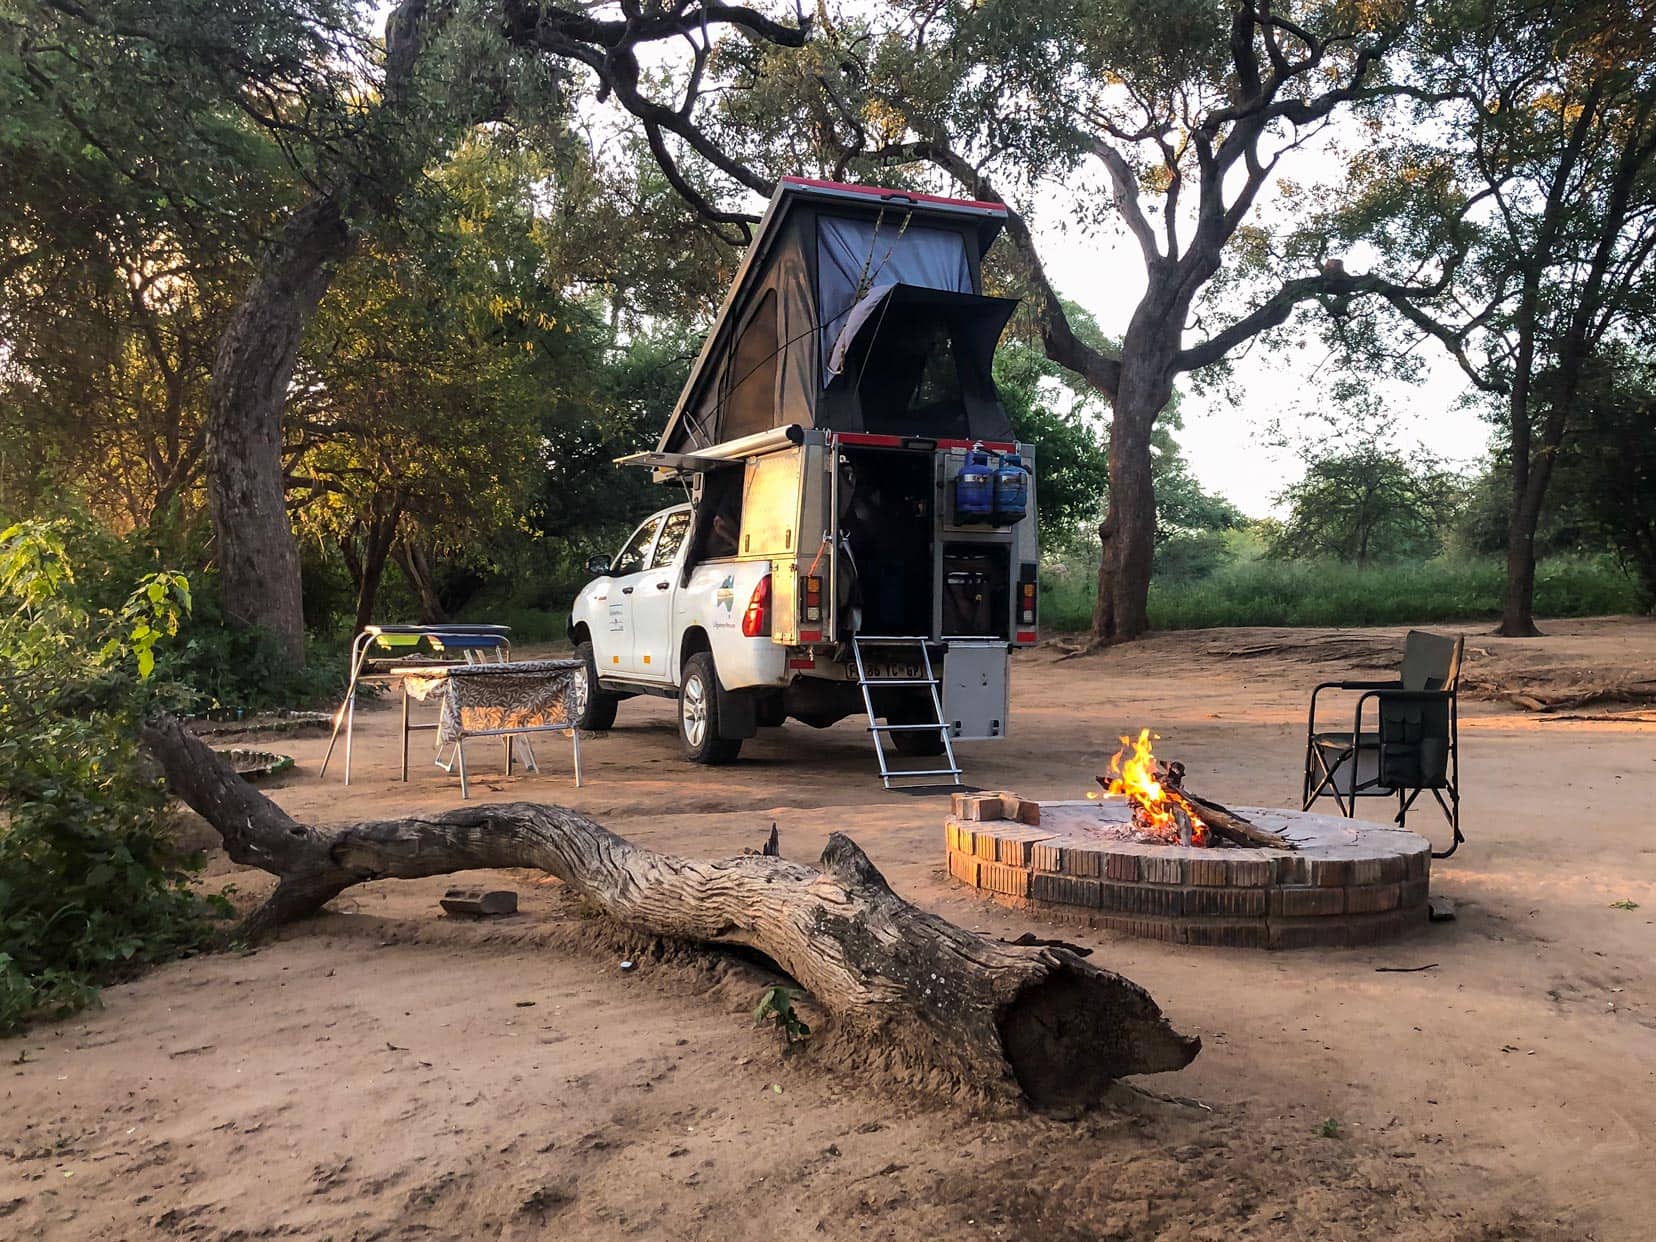 African Ranches campsite, Botswana